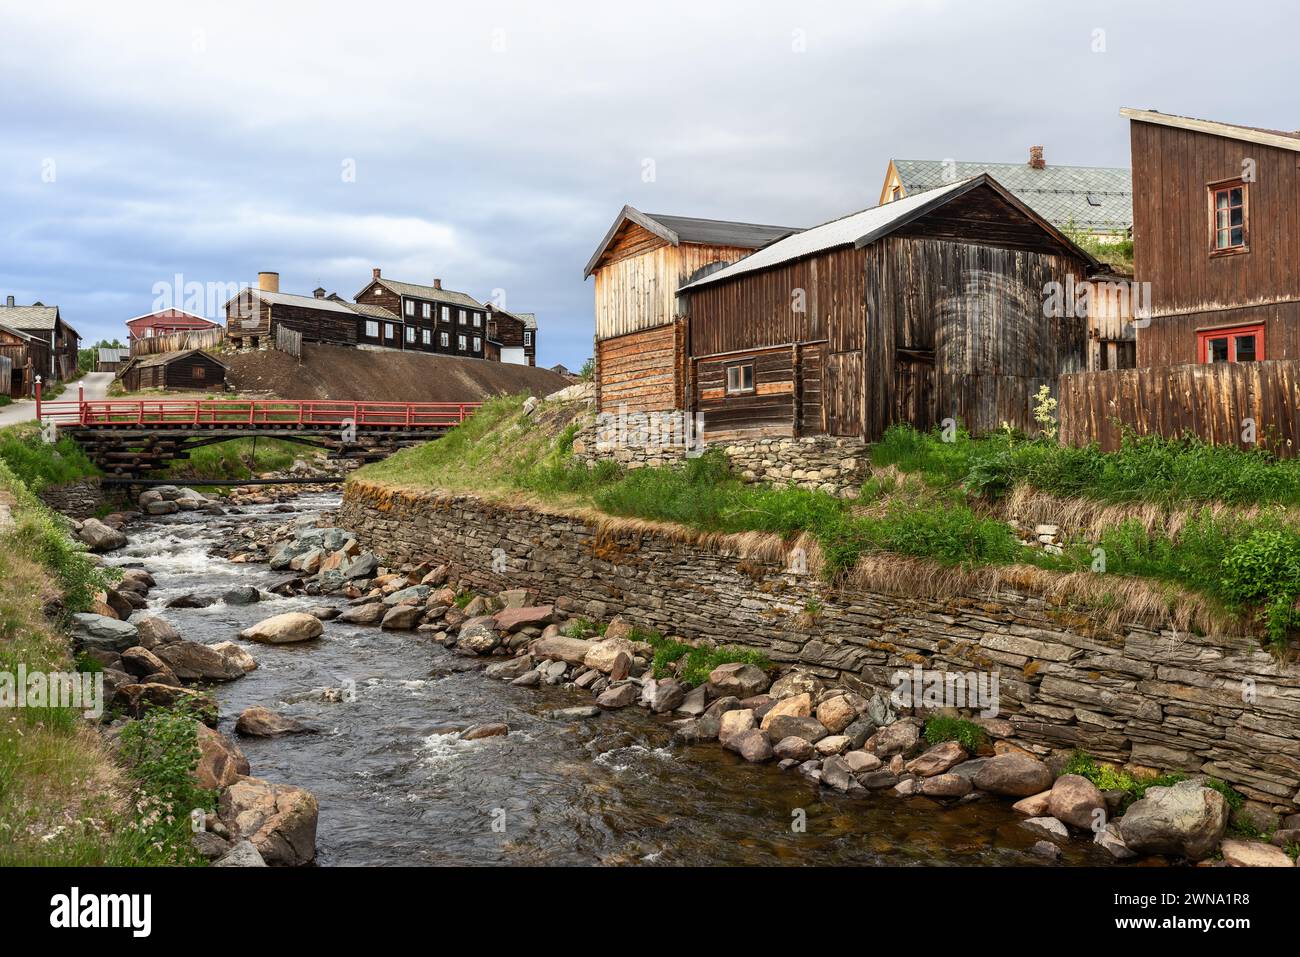 In Roros, a vibrant red bridge crosses the bustling Glomma River, surrounded by historic wooden buildings Stock Photo